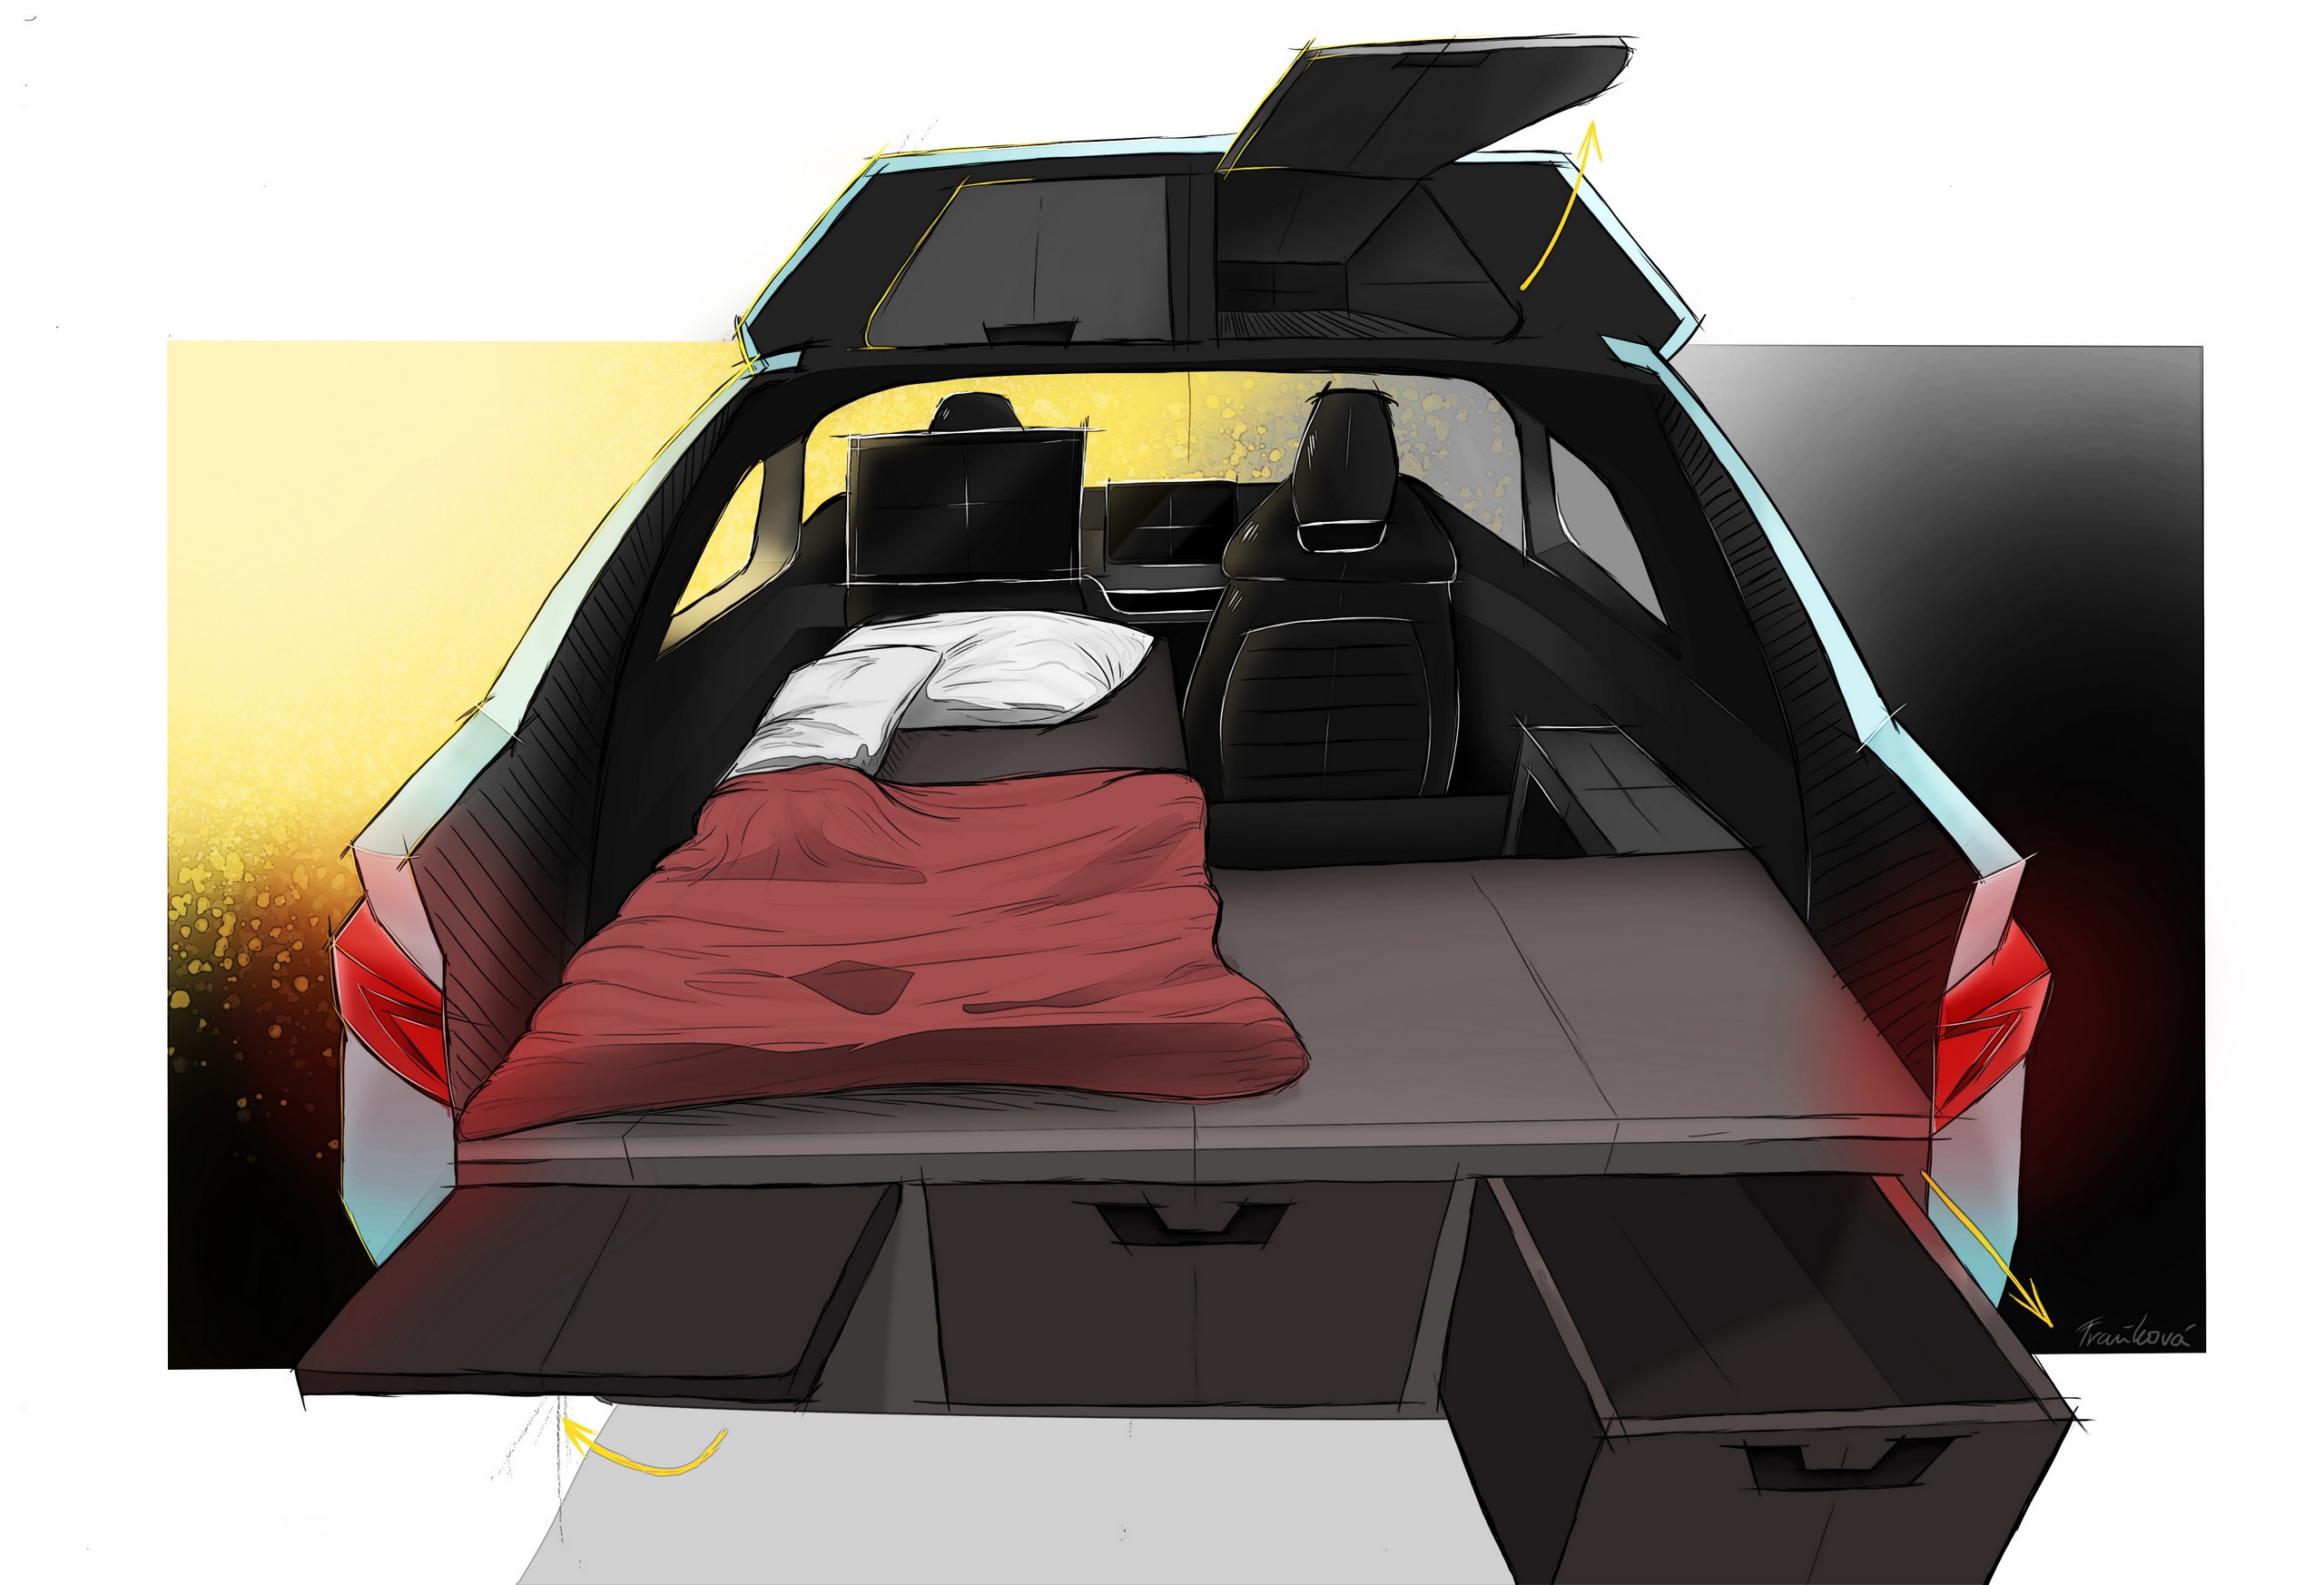 This Automaker Is Prepping an EV Camper for Digital Nomads That No One Buy - autoevolution